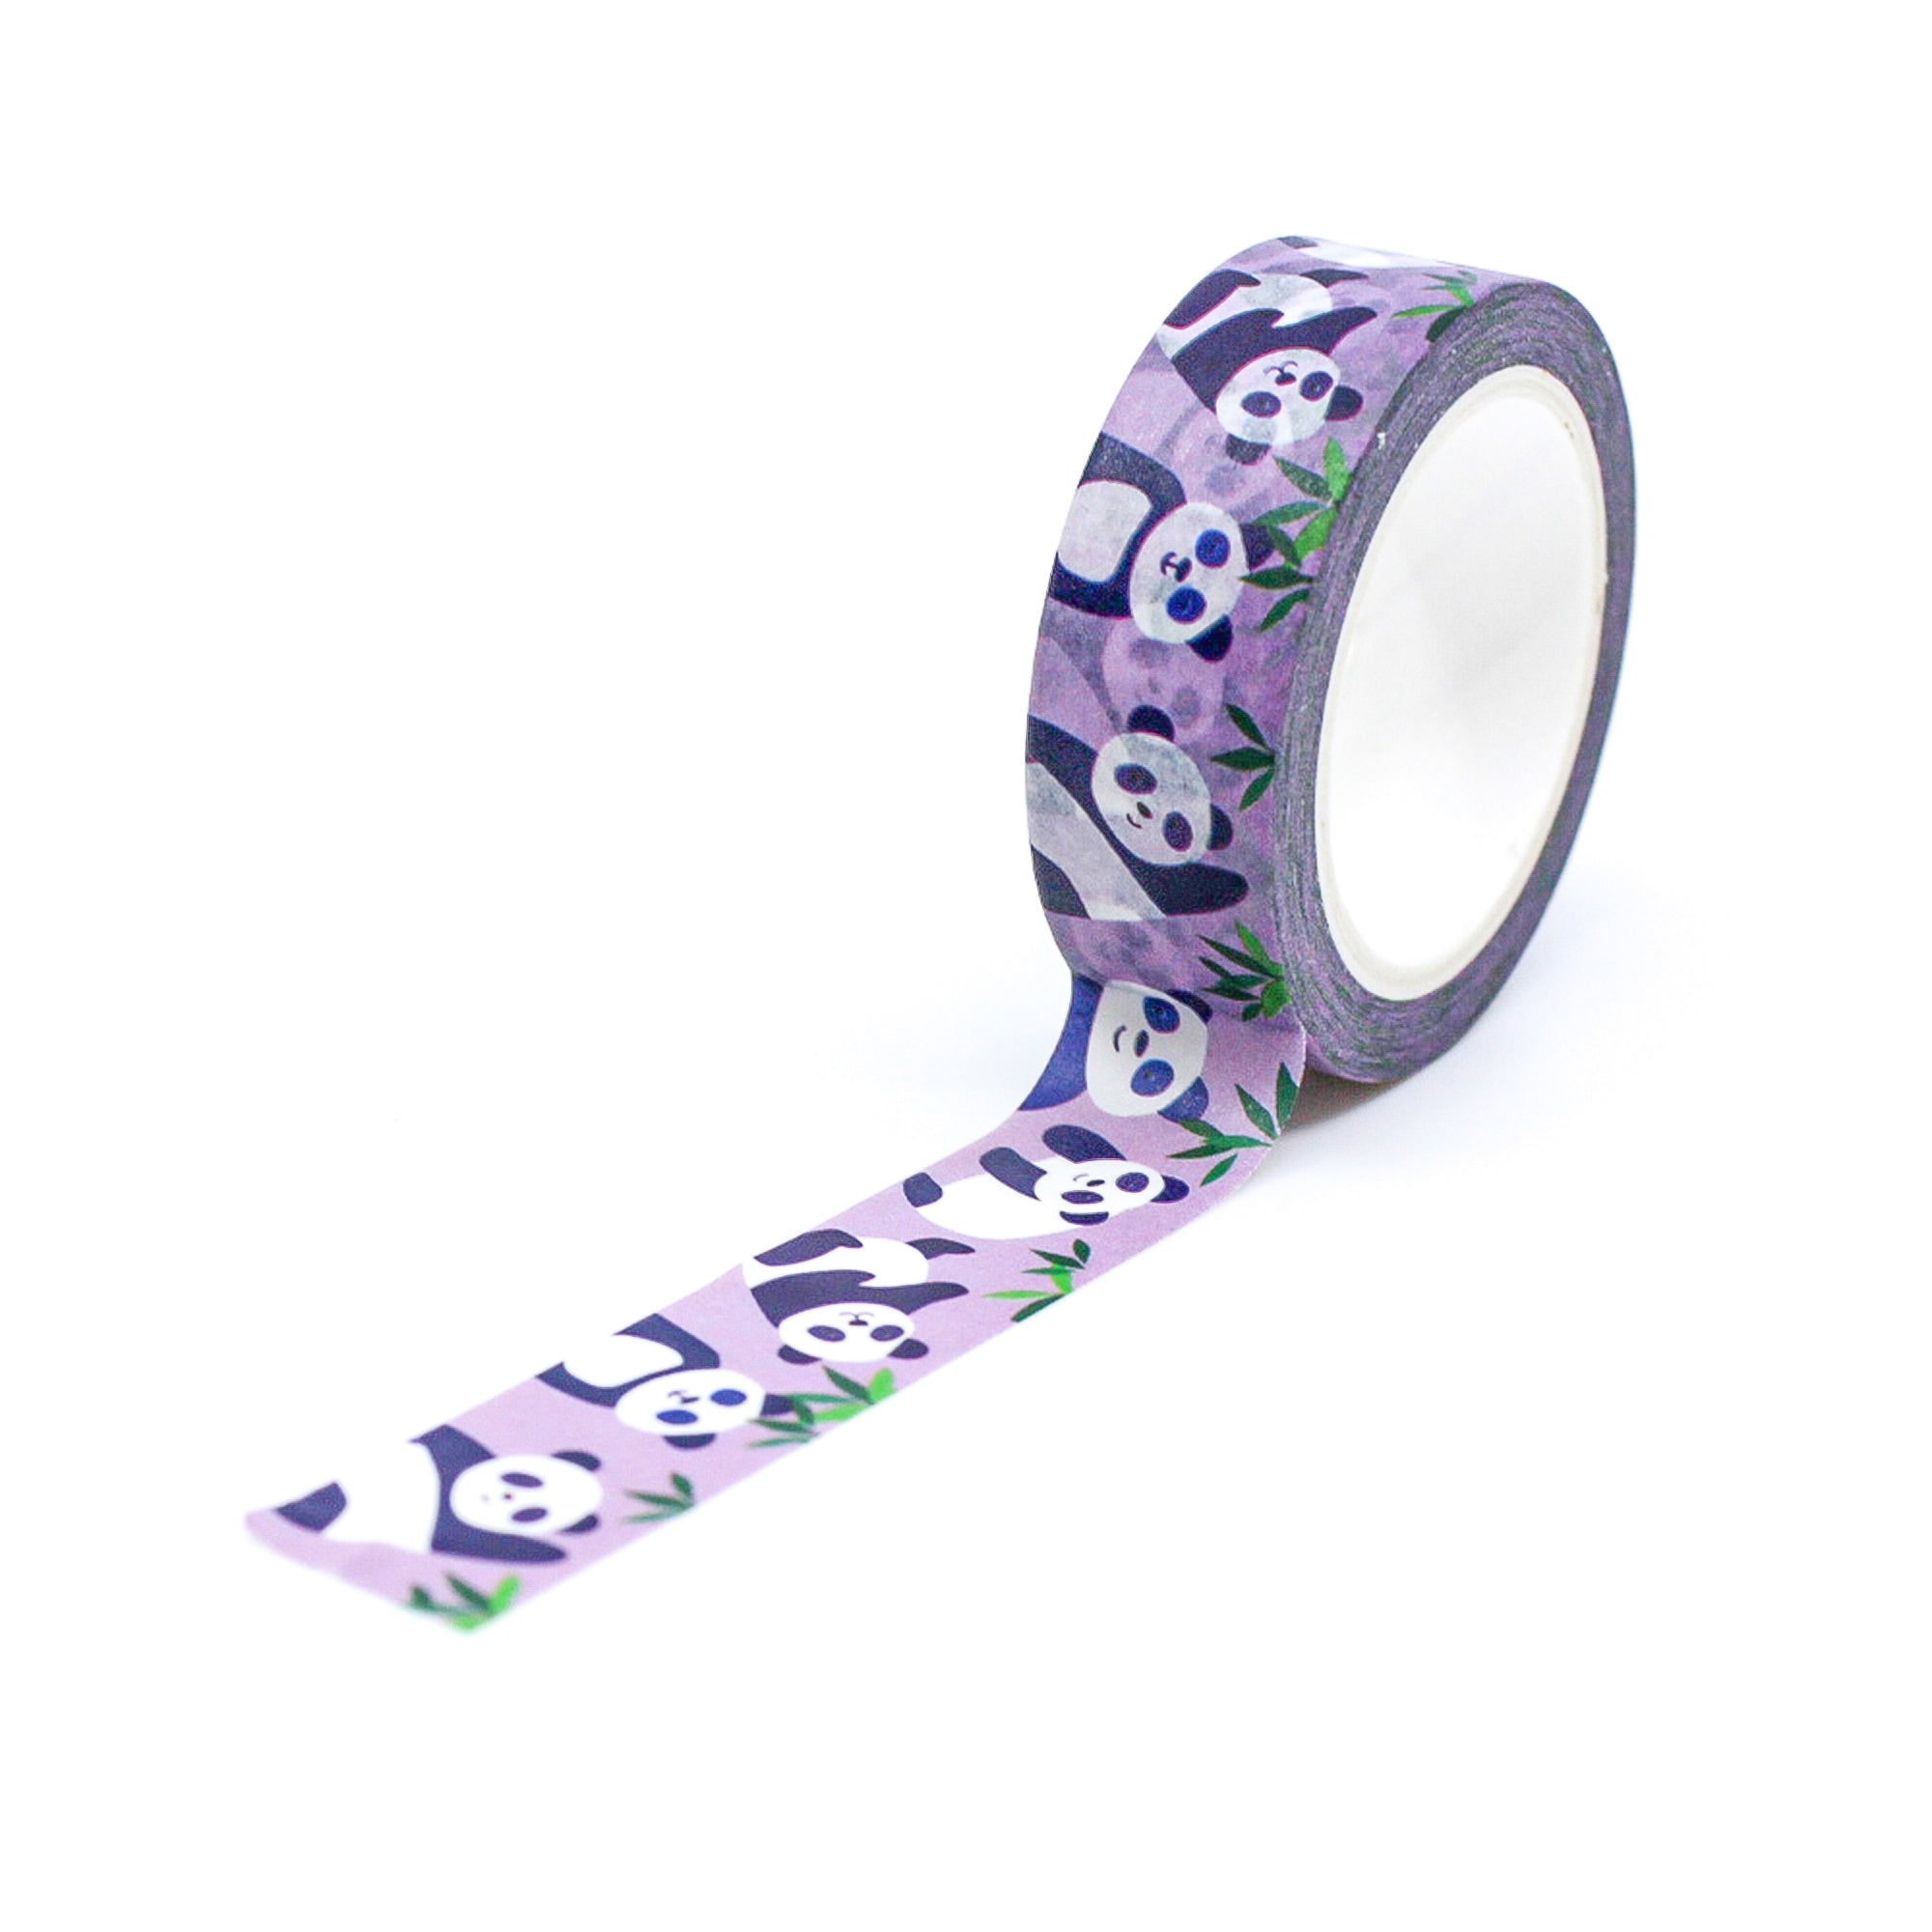 Elevate your crafts with our Purple Panda Bear Washi Tape, featuring adorable panda bear illustrations in shades of purple. Ideal for adding a cute and colorful touch to your projects. This tape from Girl of All Work is sold at BBB Supplies Craft Shop.